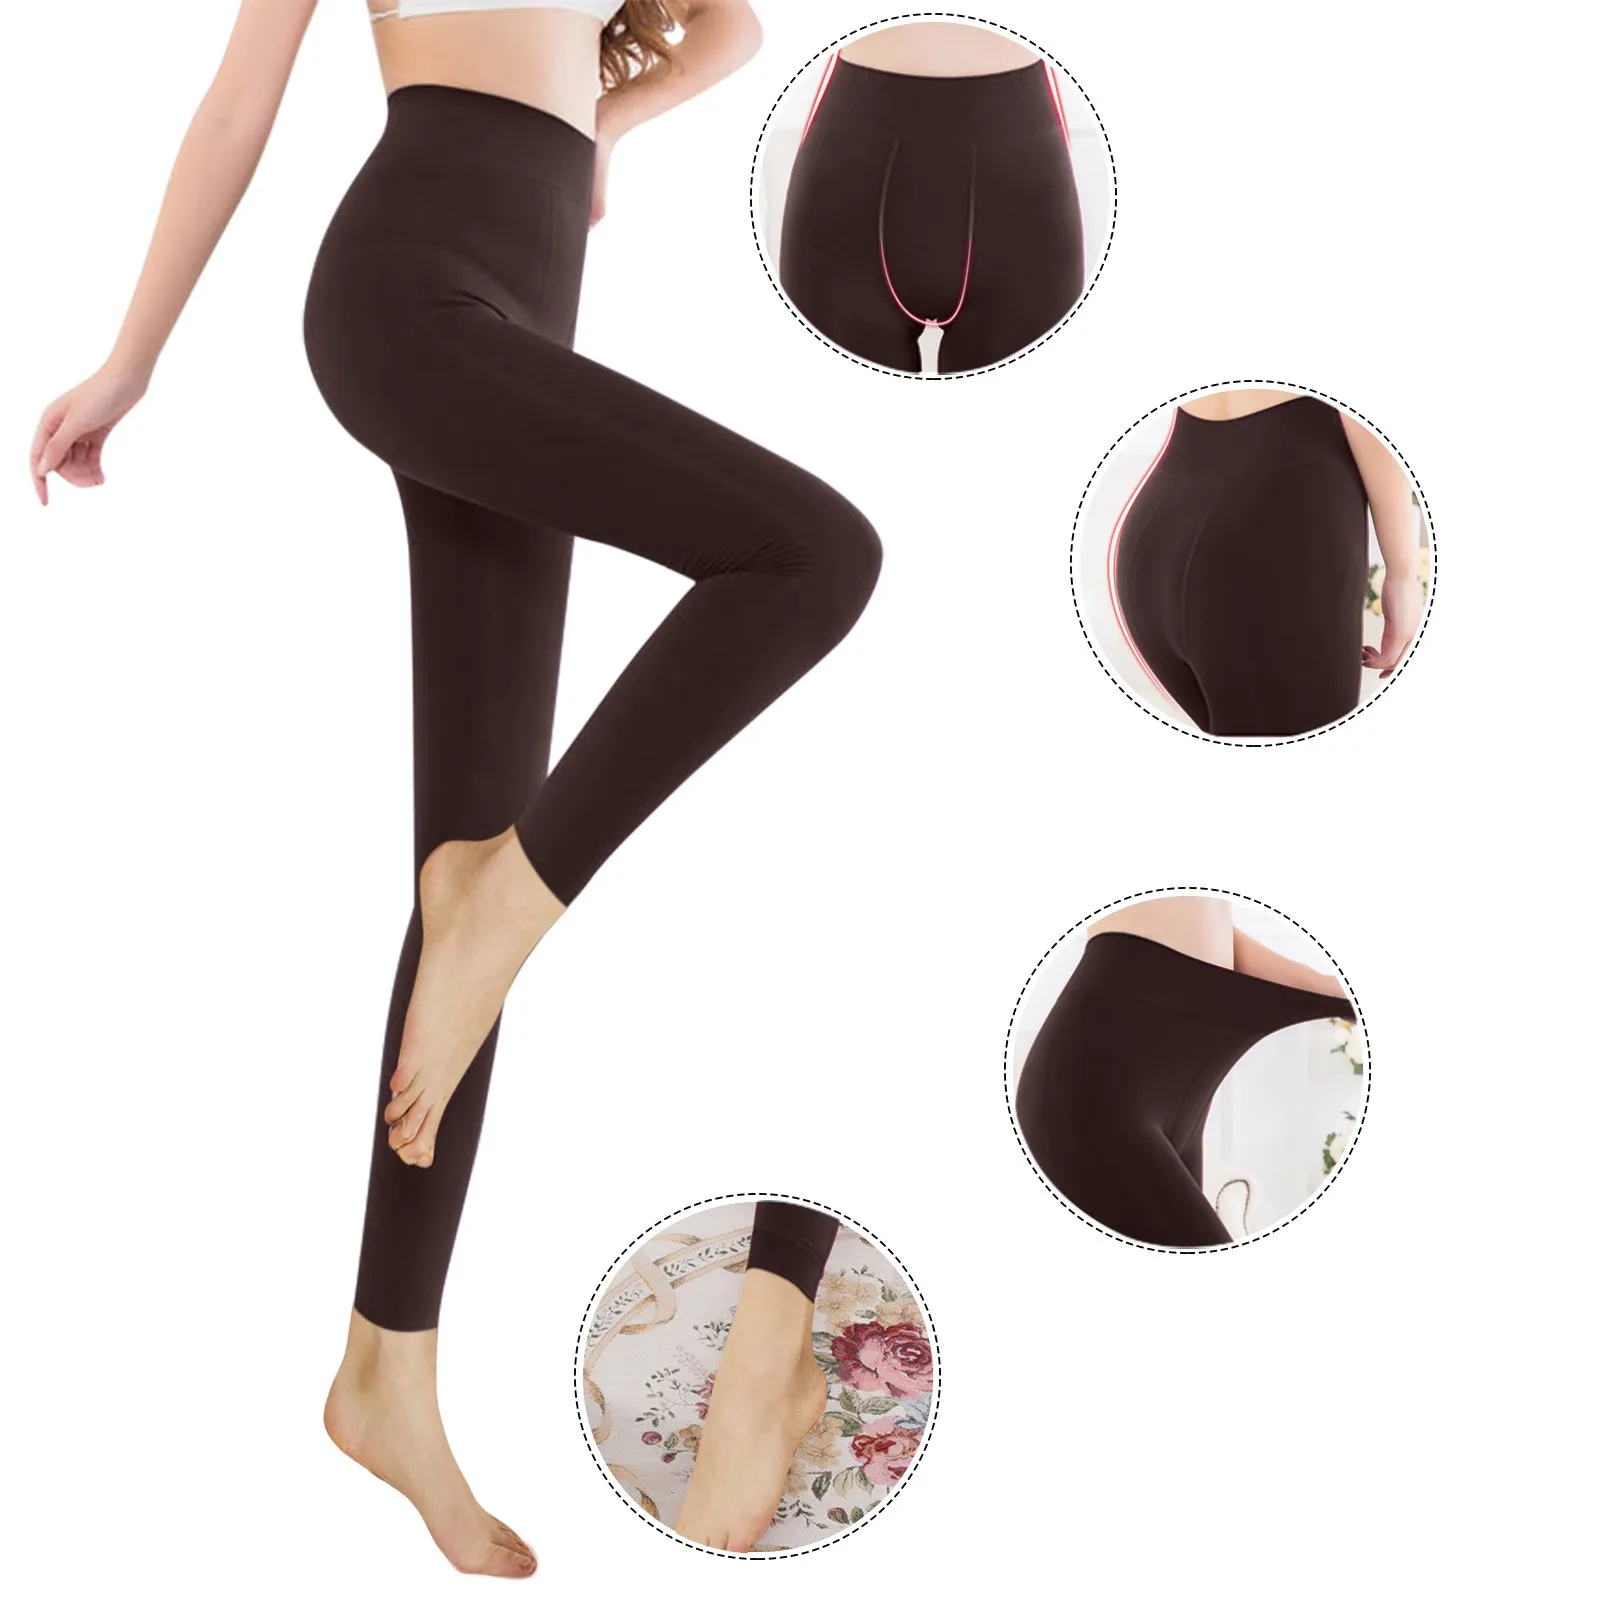 Fashion Women's Thermal Leggings Stretch Fleece Lined Winter Warm Thick Opaque Tights High Waist Ankle-Length Pants Pantalon A40 high waisted leggings